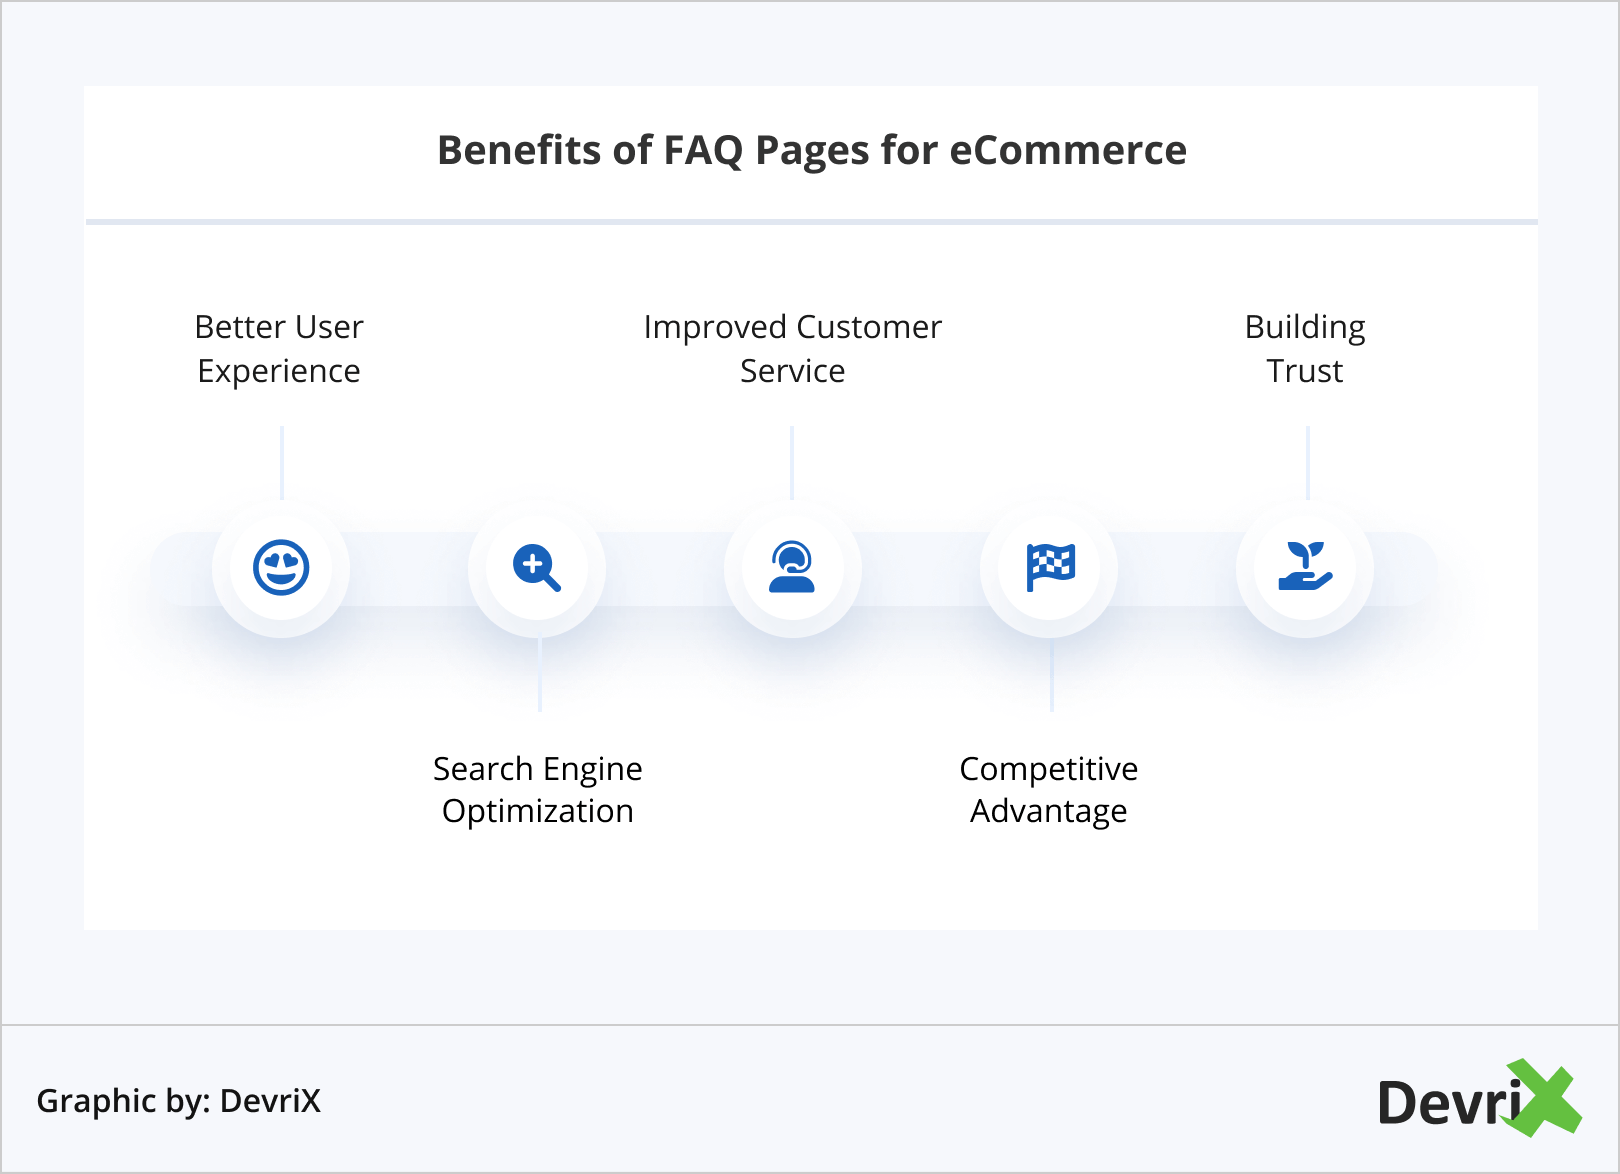 Benefits of FAQ Pages for eCommerce